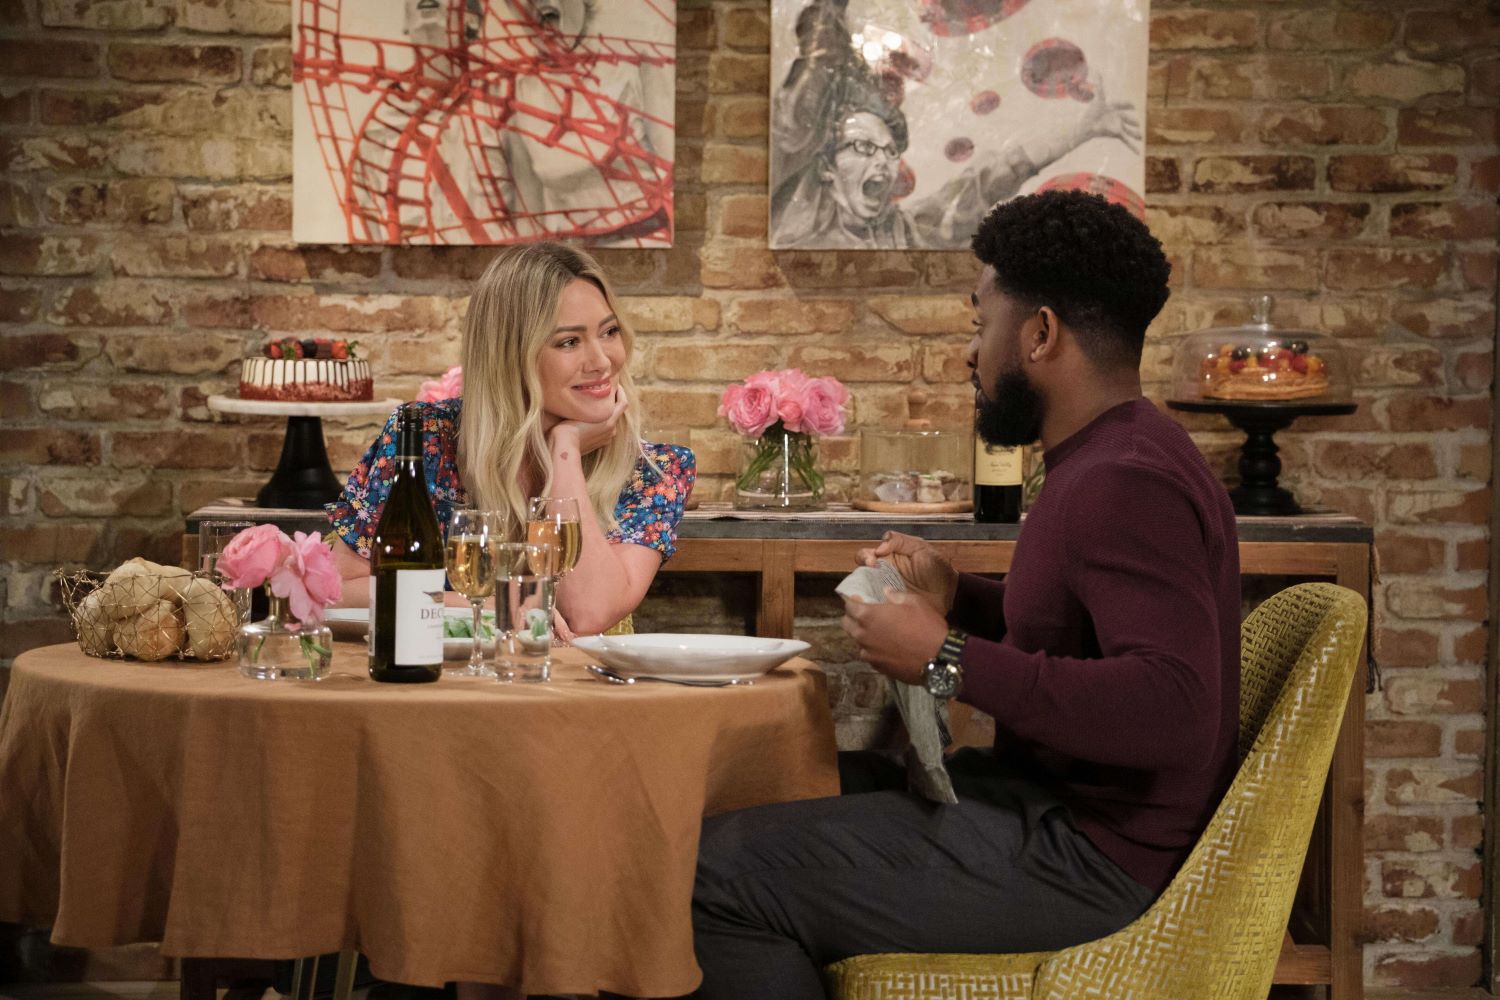 Hilary Duff as Sophie and Daniel Augustin as Ian eat dinner at a restaurant in 'How I Met Your Father' Season 2 Episode 7 on Hulu. Sophie wears a multi-colored floral dress. Ian wears a maroon sweater and dark gray pants.